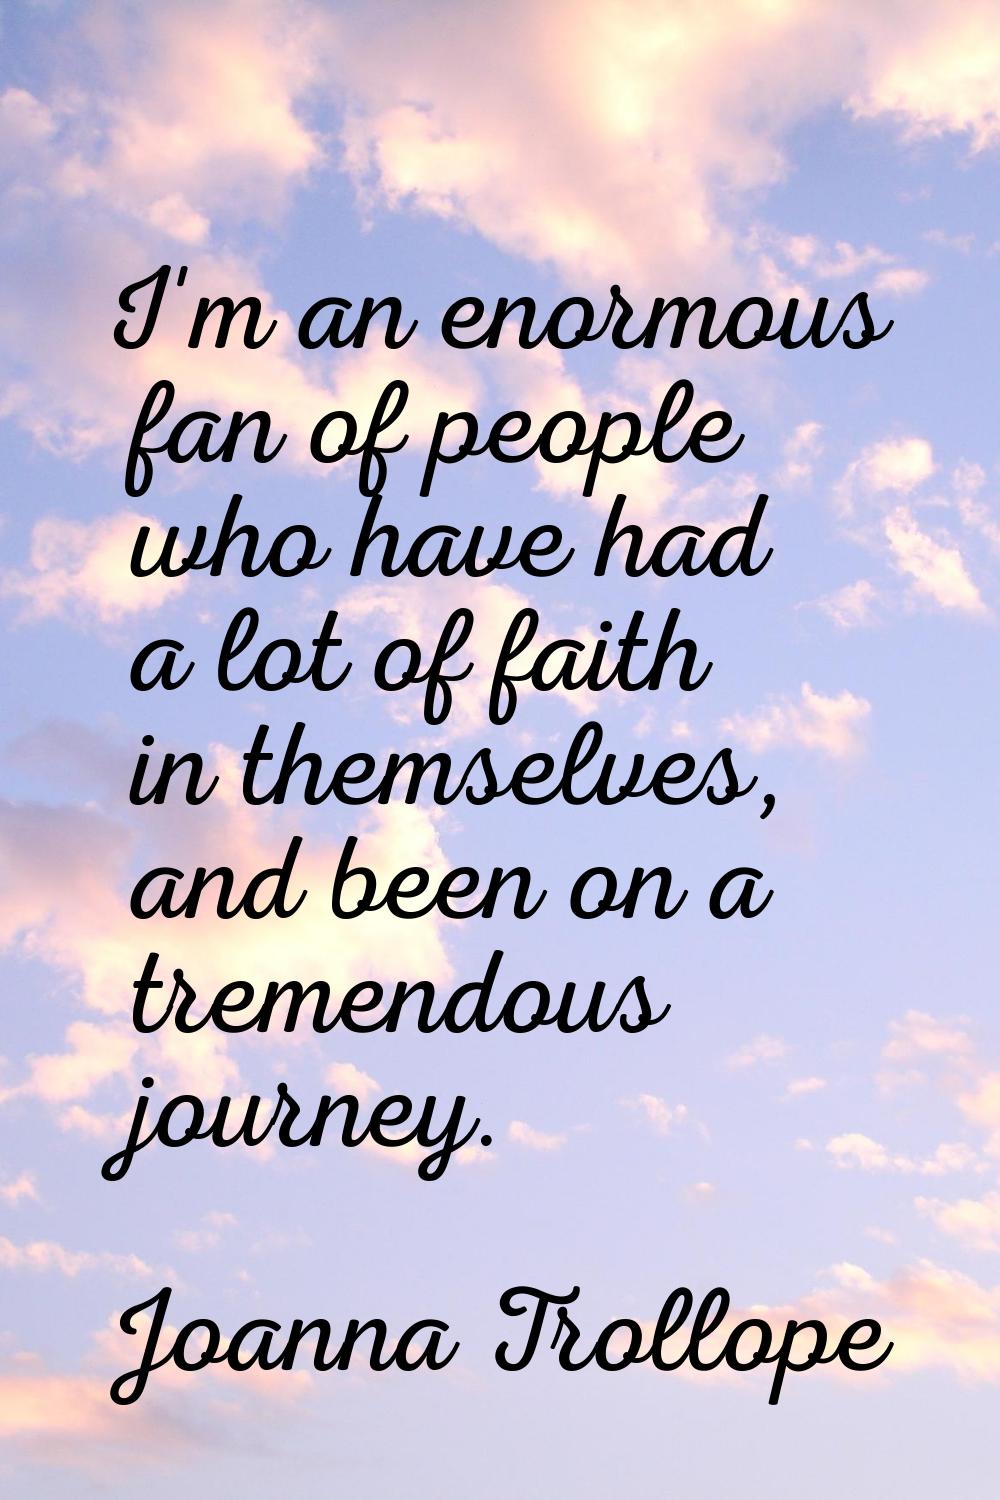 I'm an enormous fan of people who have had a lot of faith in themselves, and been on a tremendous j